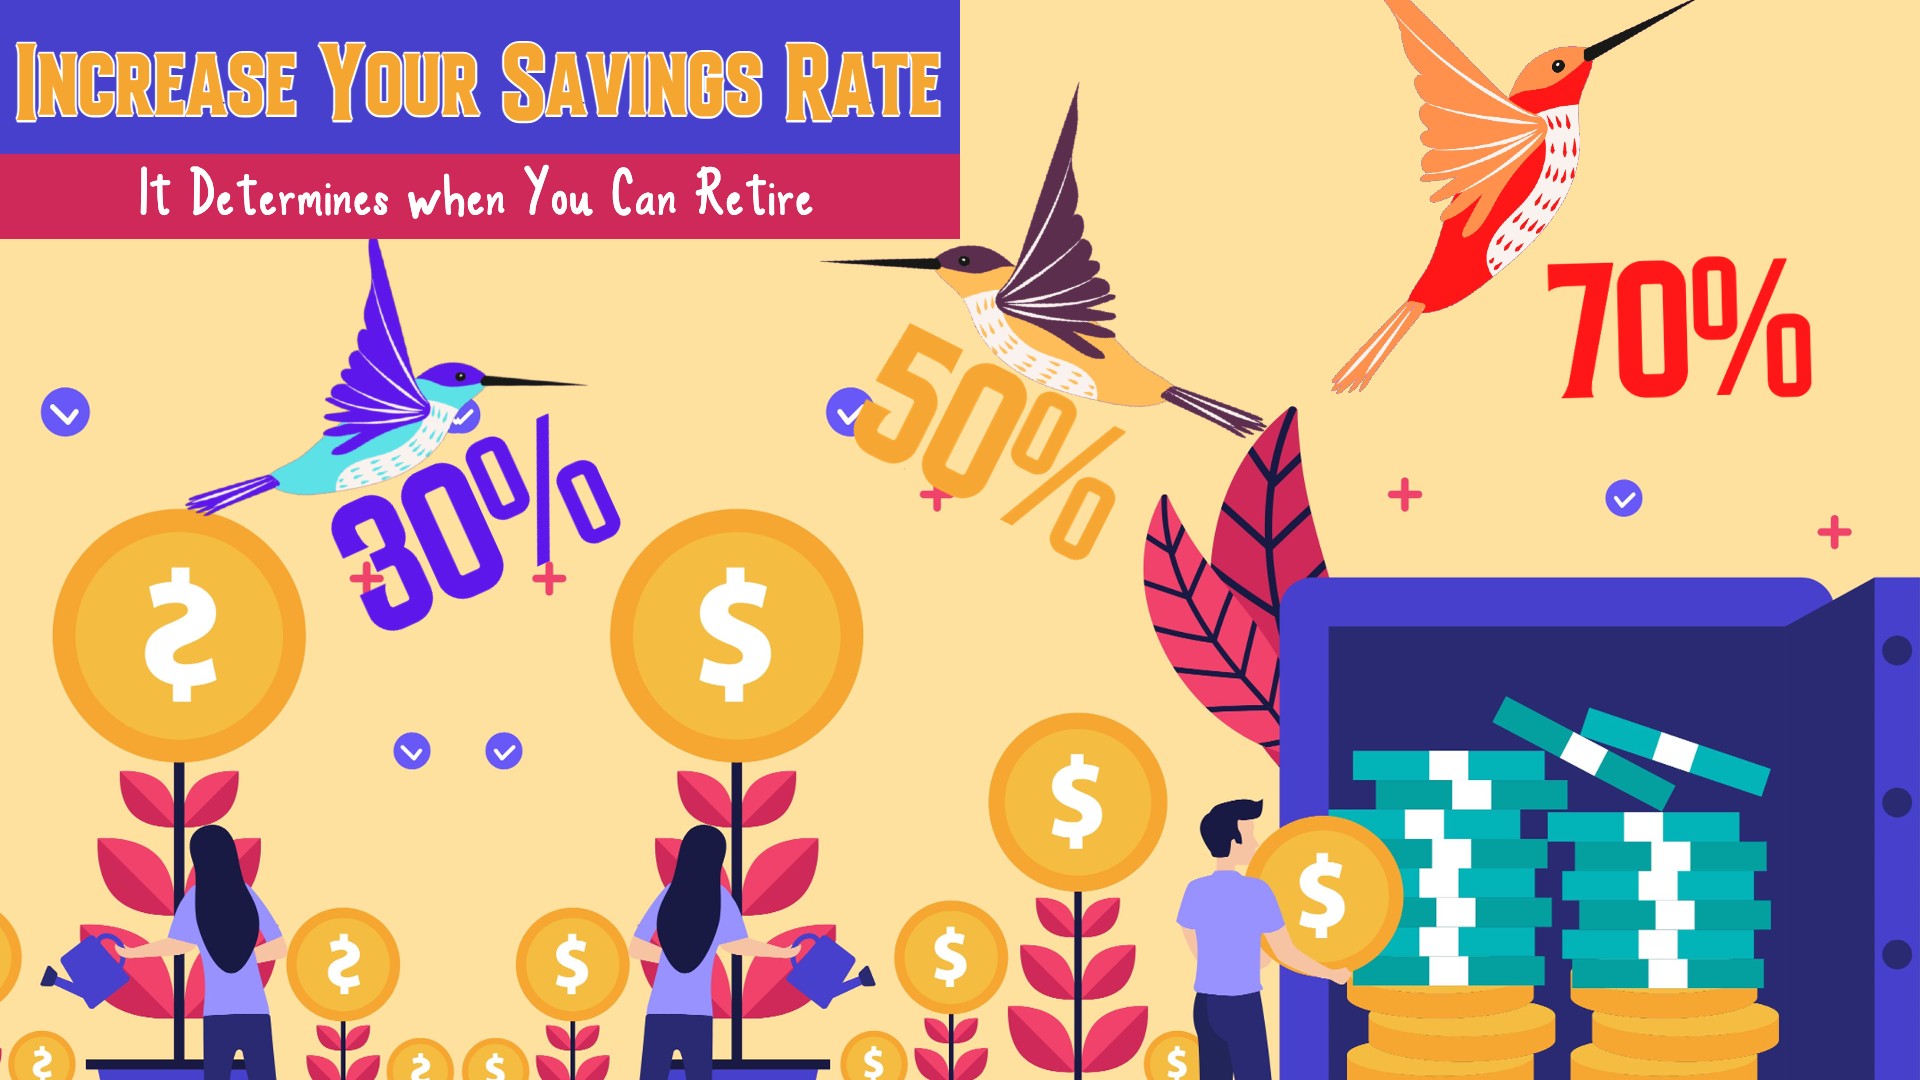 Increase Your Savings Rate: It Determines When You Can Retire